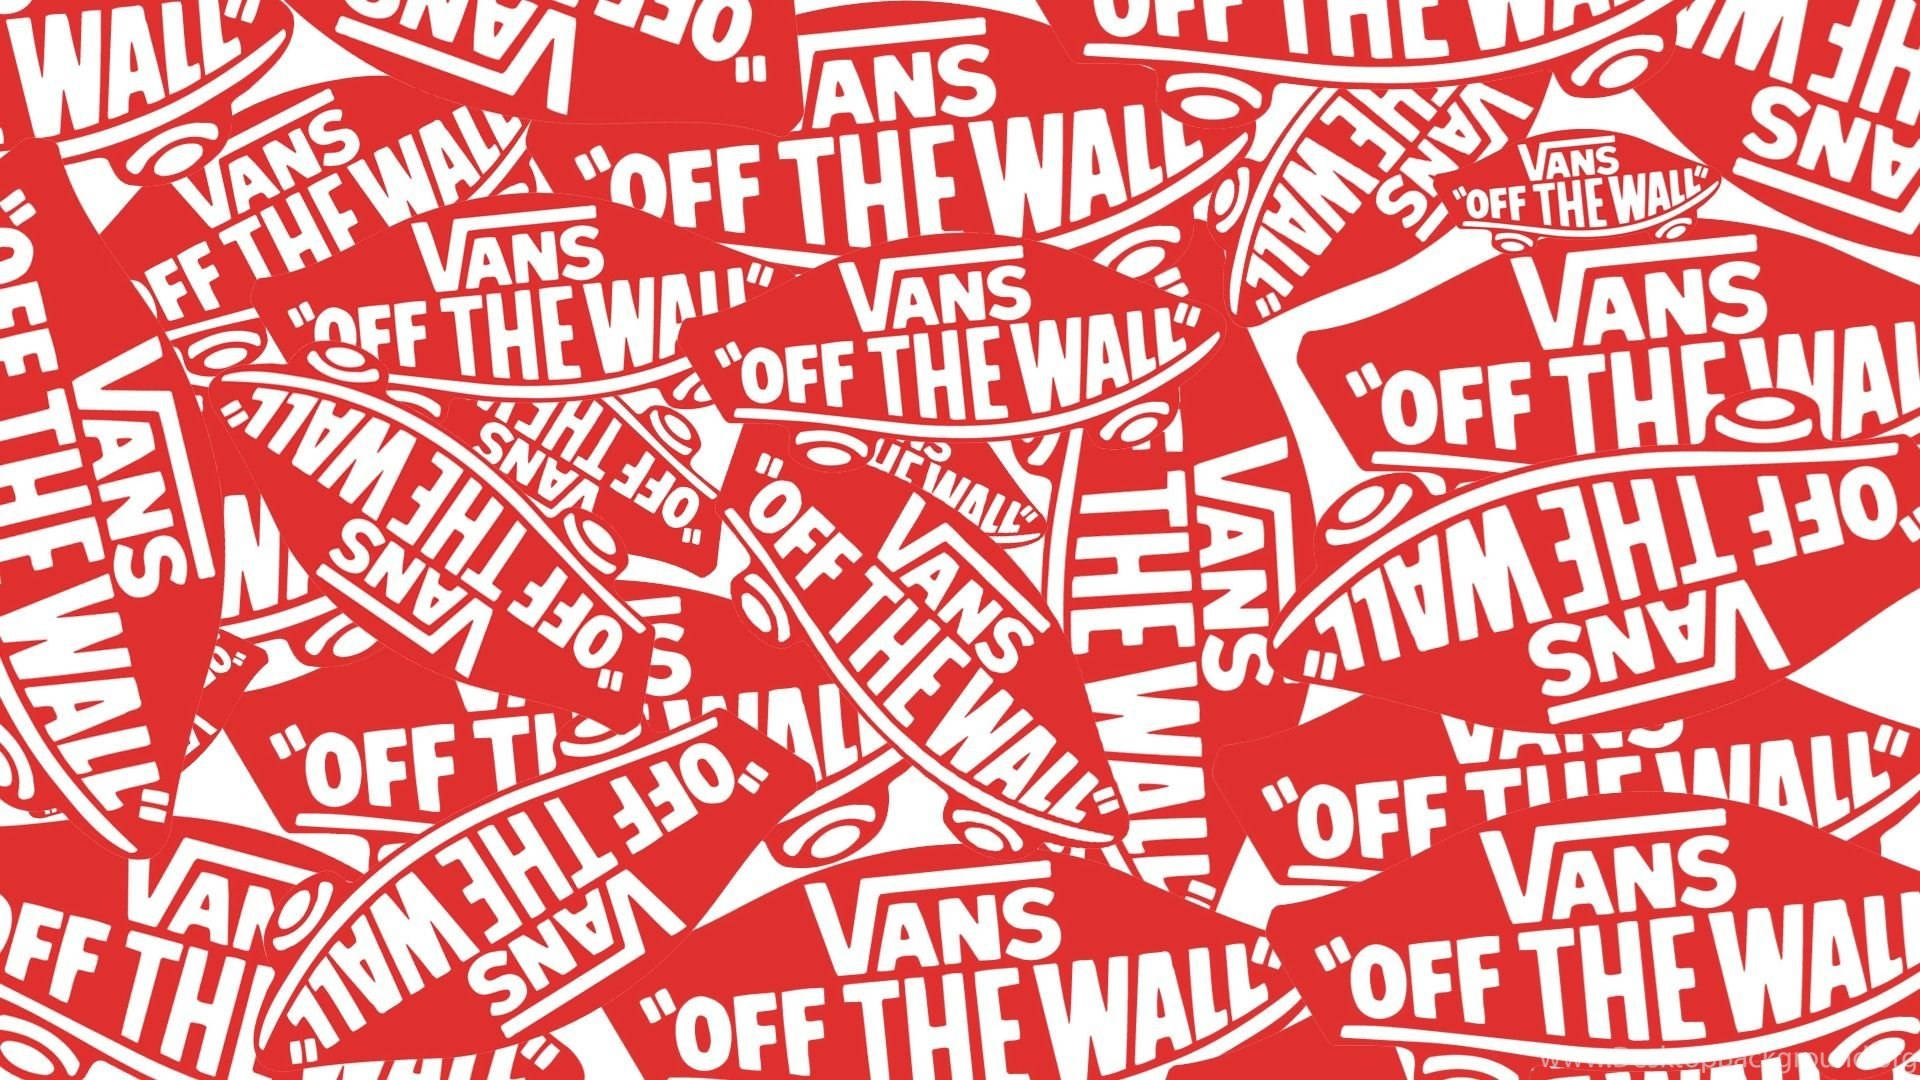 "Go Off-The-Wall with Vans!" Wallpaper